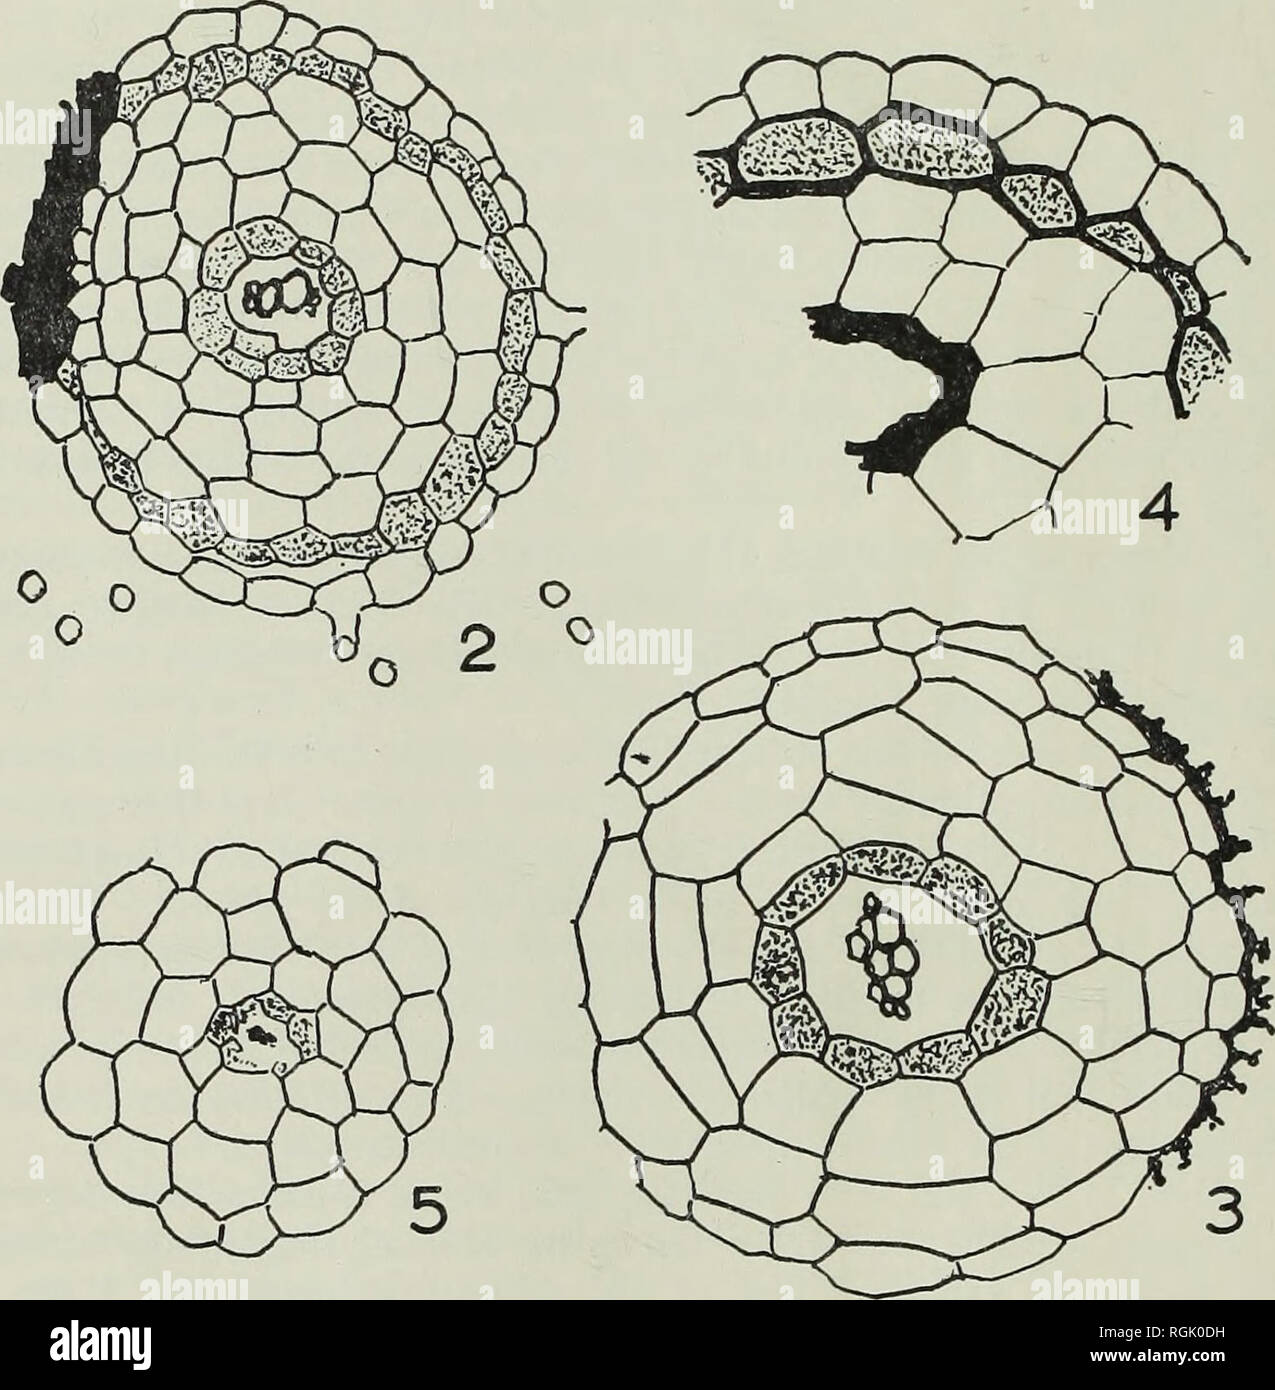 . Bulletin of the British Museum (Natural History), Geology. 6o MORPHOLOGY AND RELATIONSHIPS OF RACHIOPTERIS CYLINDRICA of the exodermis, usually have dark contents. The state of preservation of the roots, like that of the stems and petioles, is very variable. It is only rarely that the piliferous layer is present and frequently the exodermis is also represented by nothing more than a ragged fringe of broken down cell remains (Text-fig. 3). The branching of the roots is monopodial. The daughter roots and their branches are. Figs. 2-5. Psalixochlaena cylindHca (Will). Camera lucida drawings of  Stock Photo